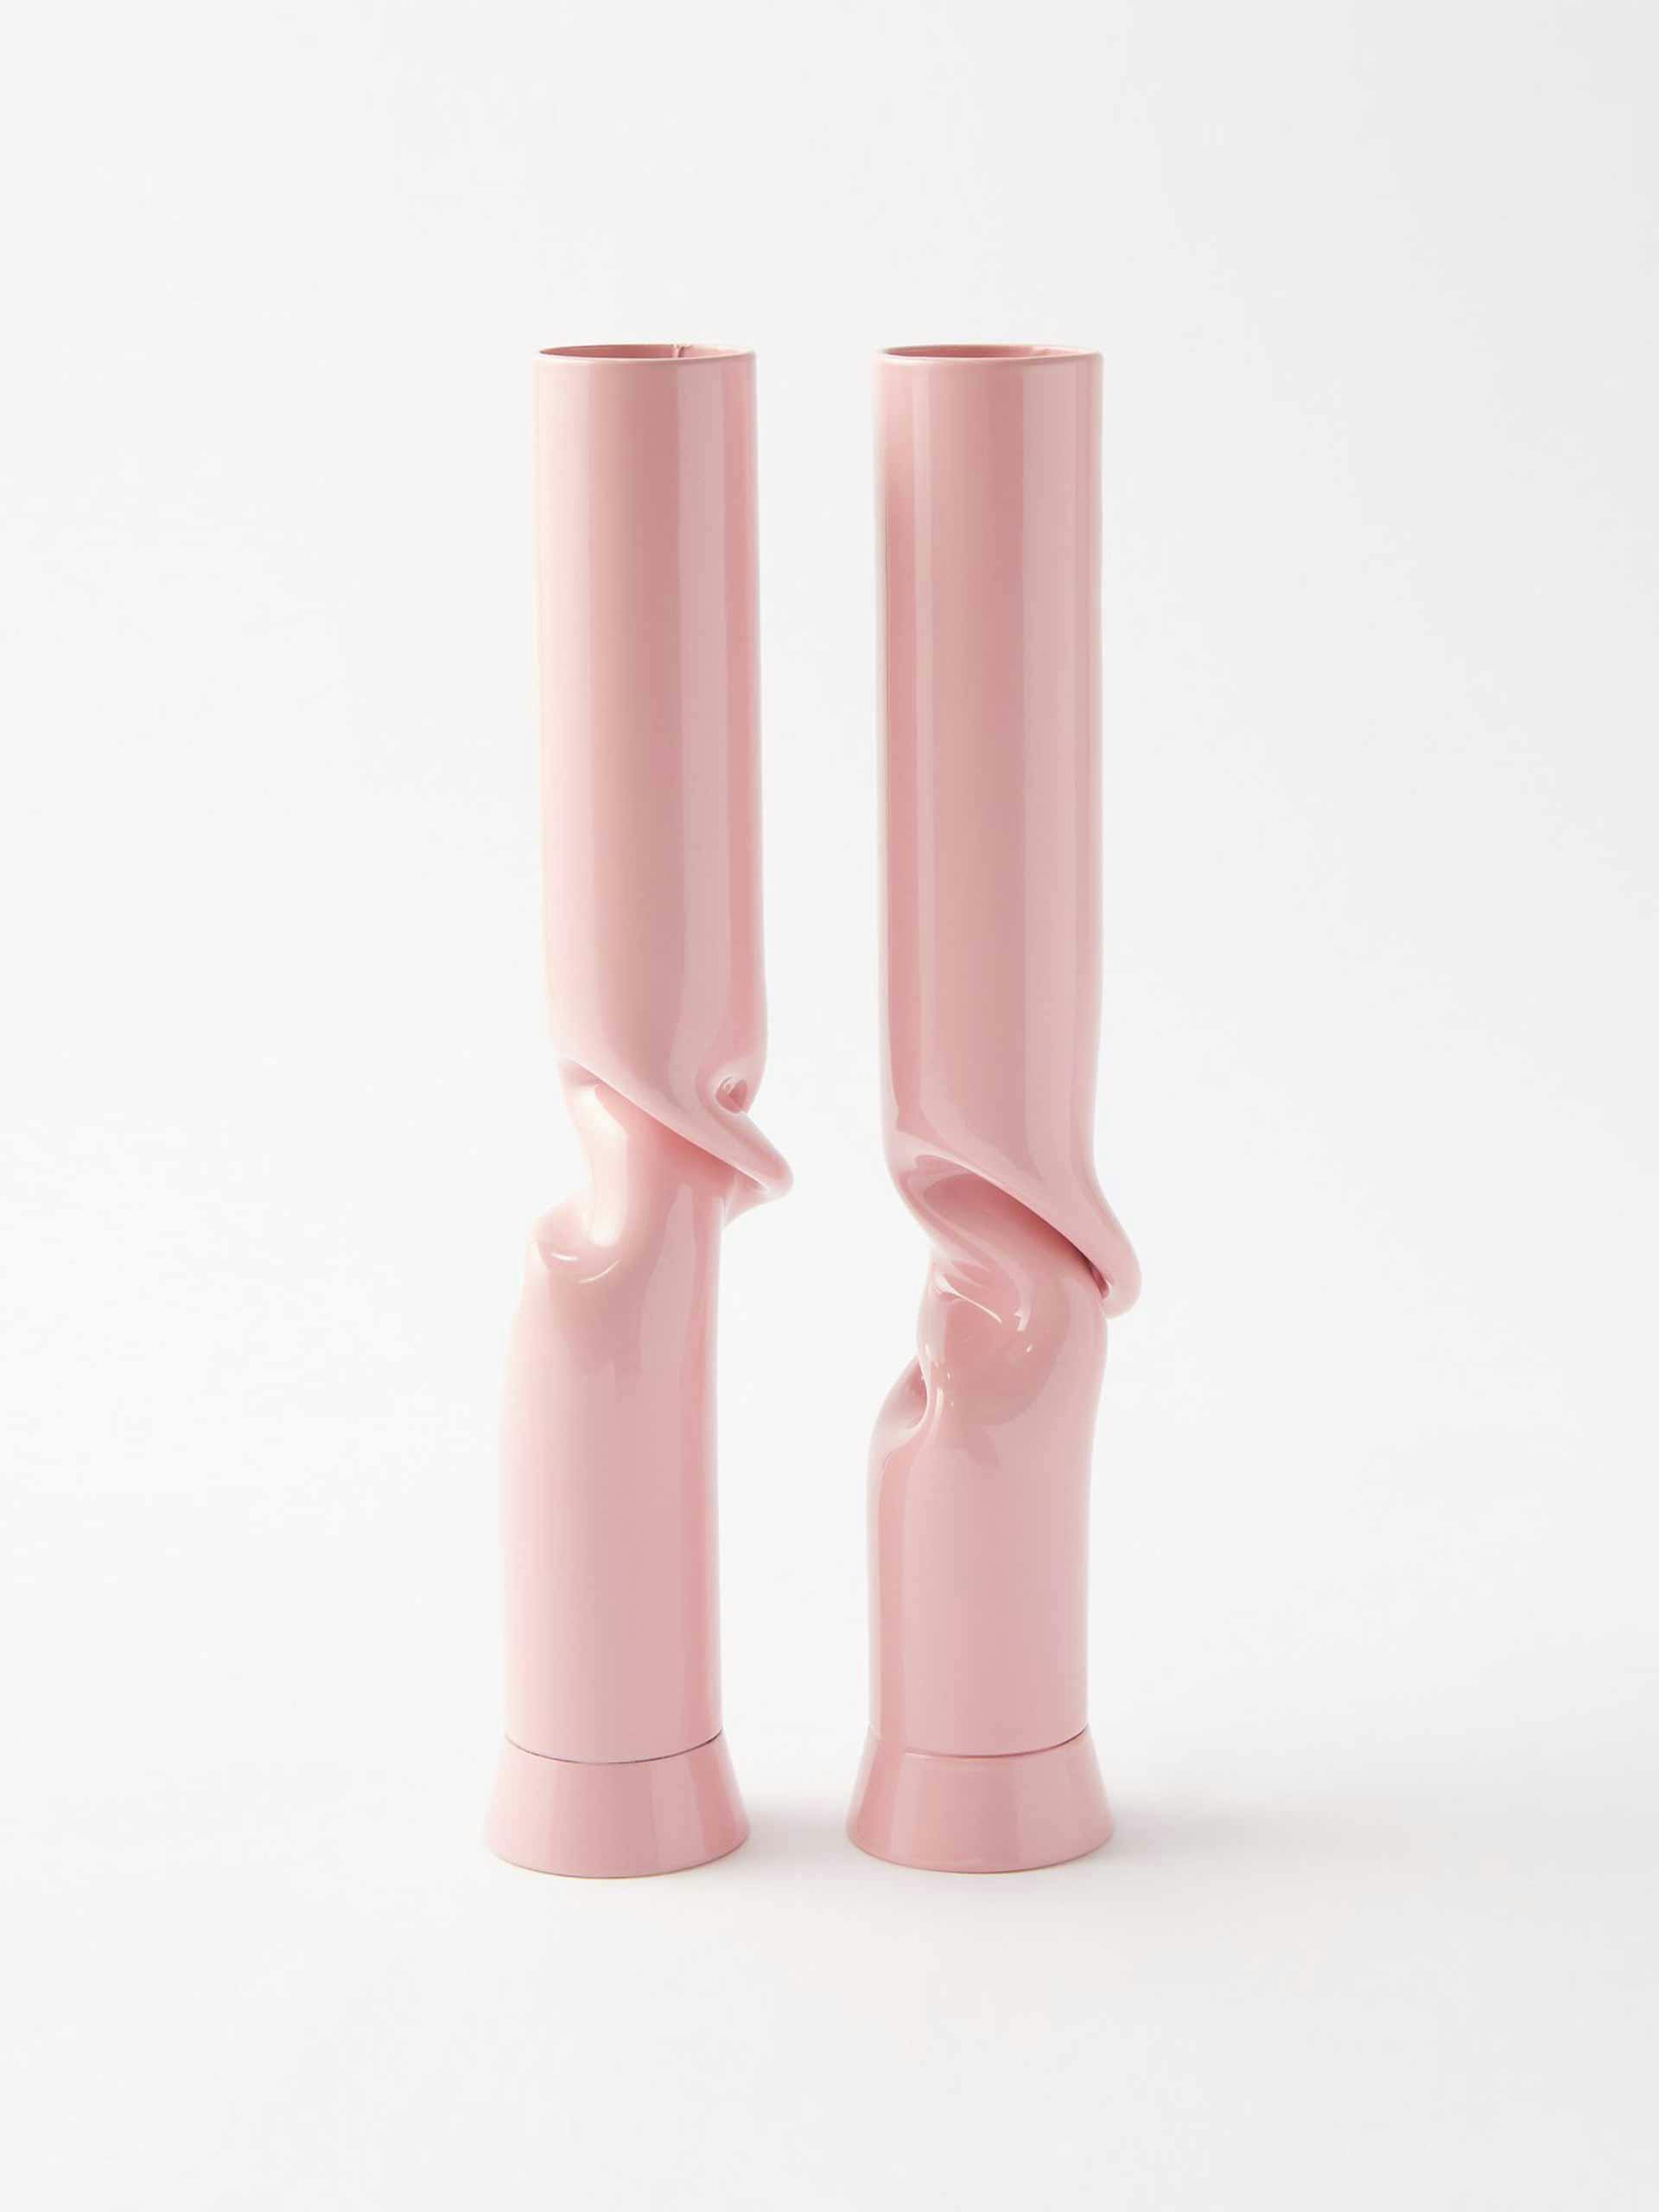 Pink steel candlestick holders (set of 2)